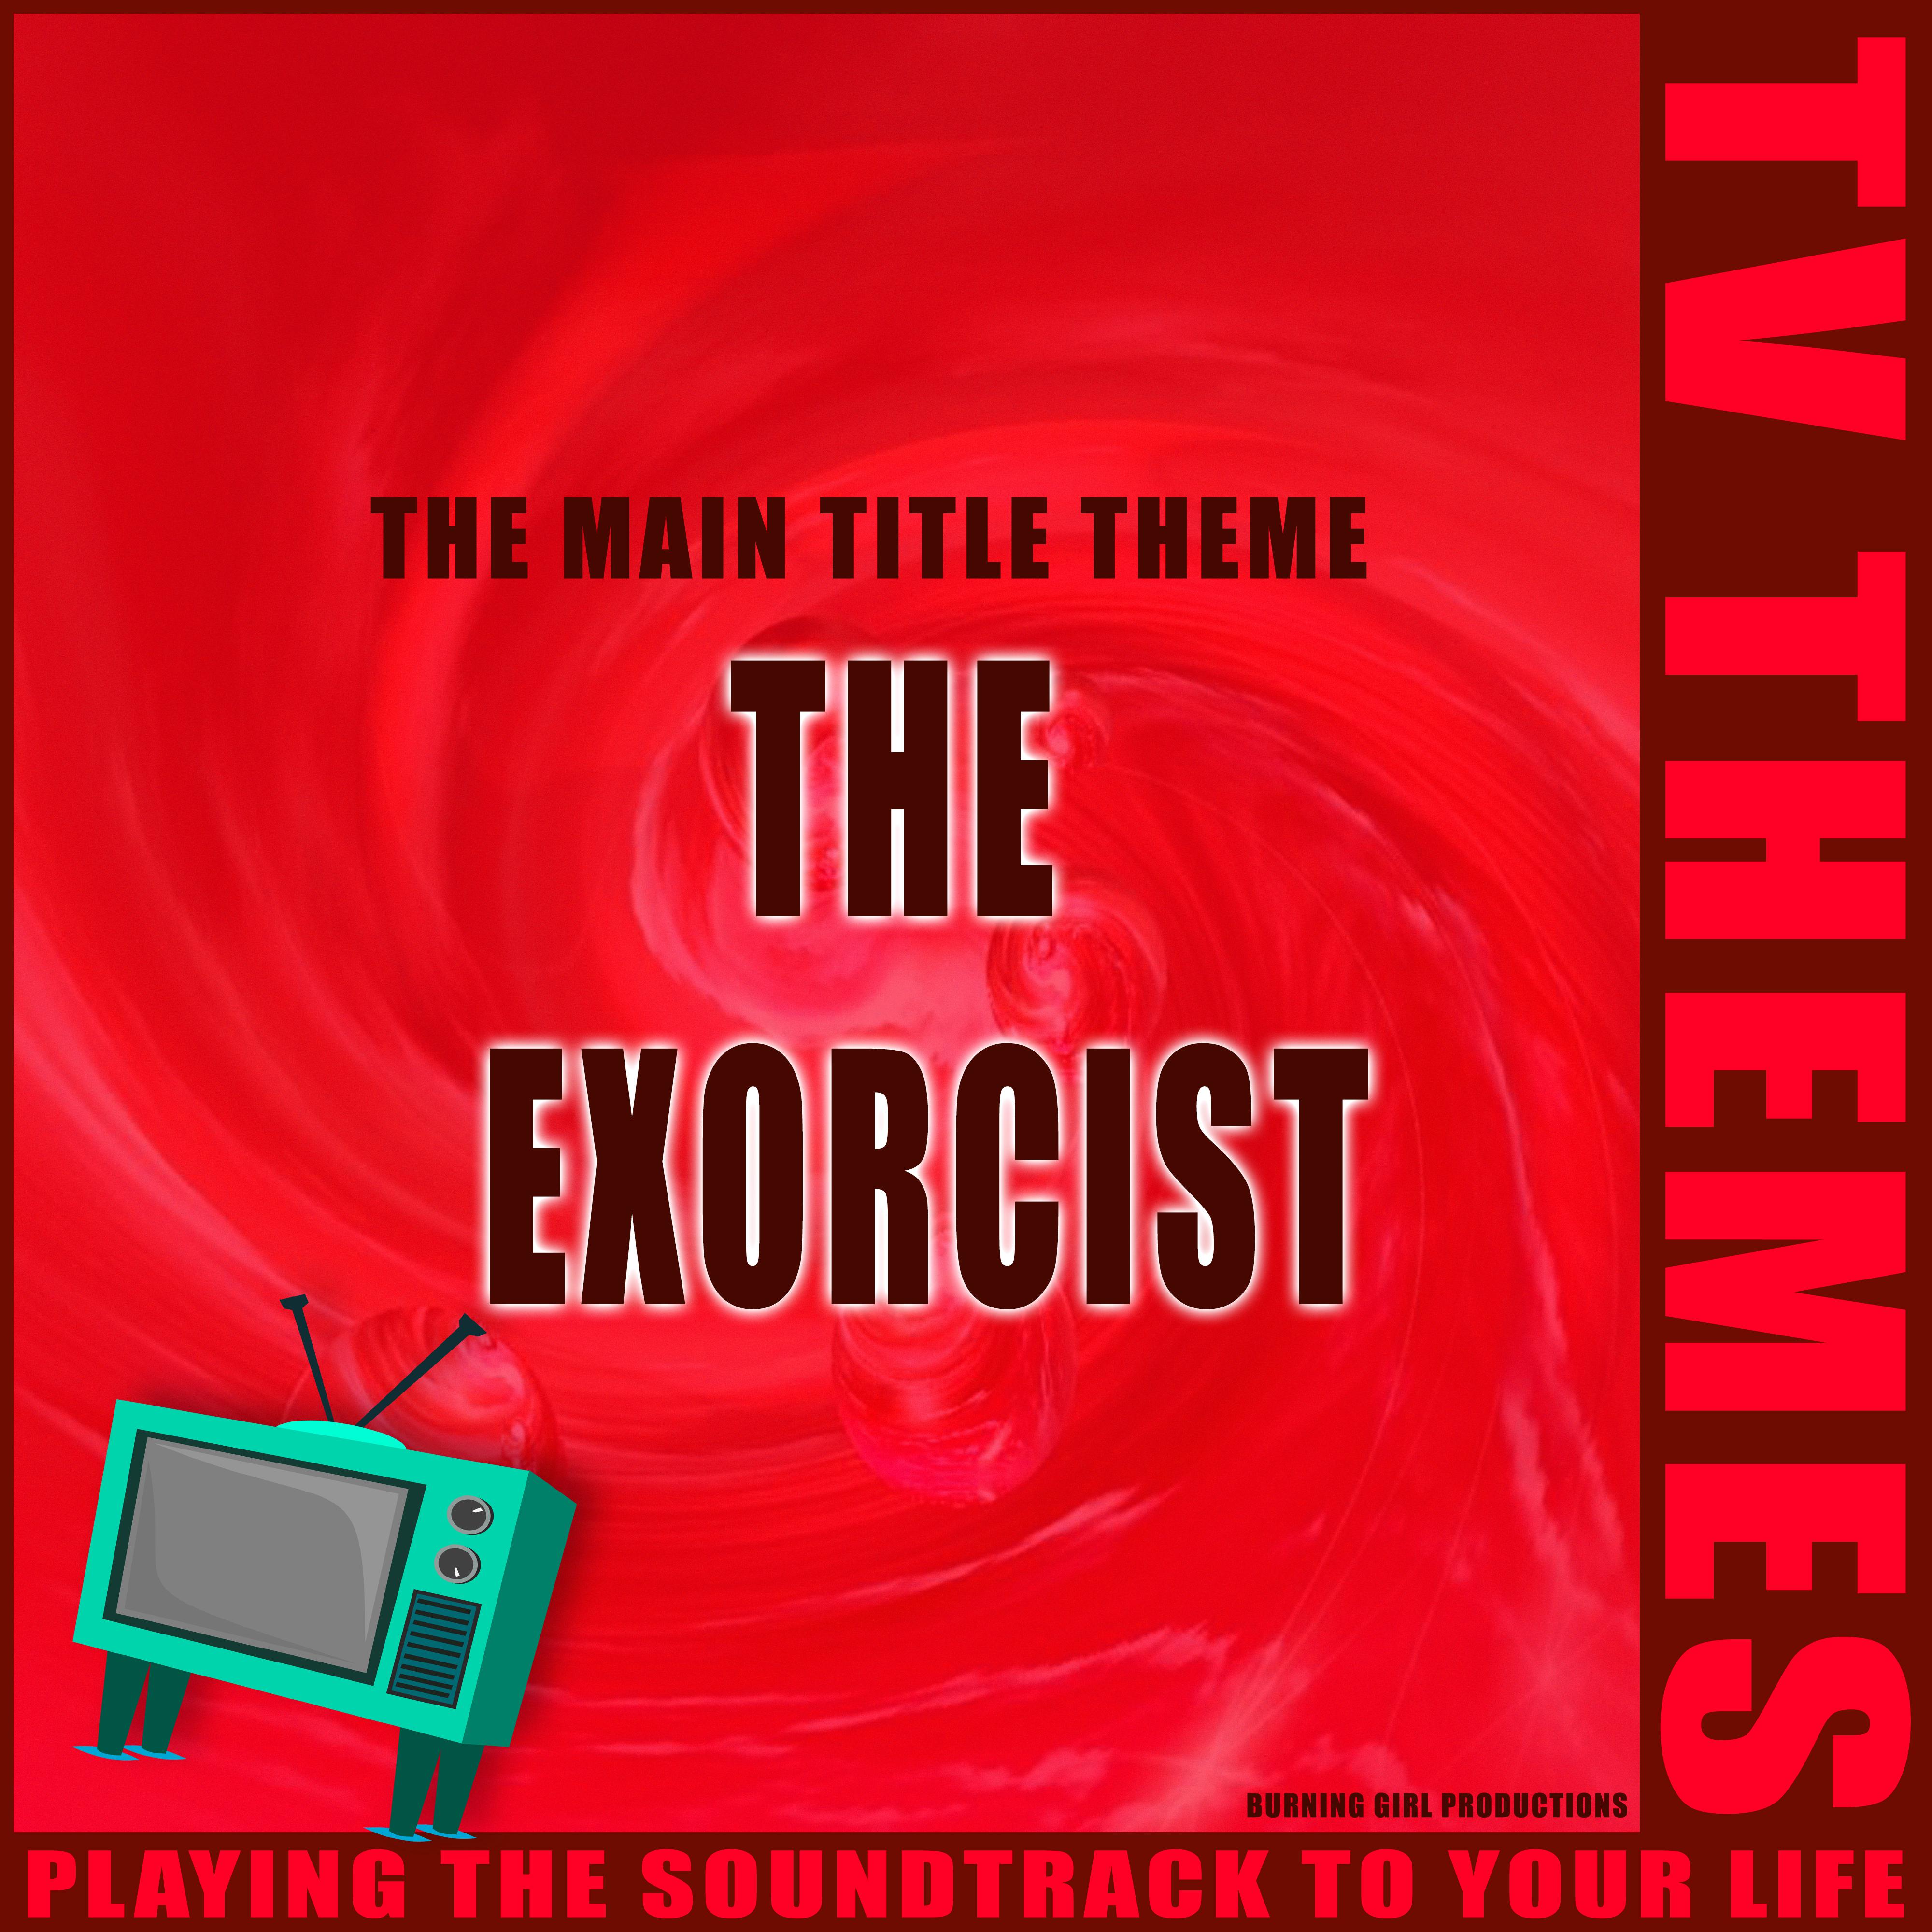 The Main Title Theme - The Exorcist